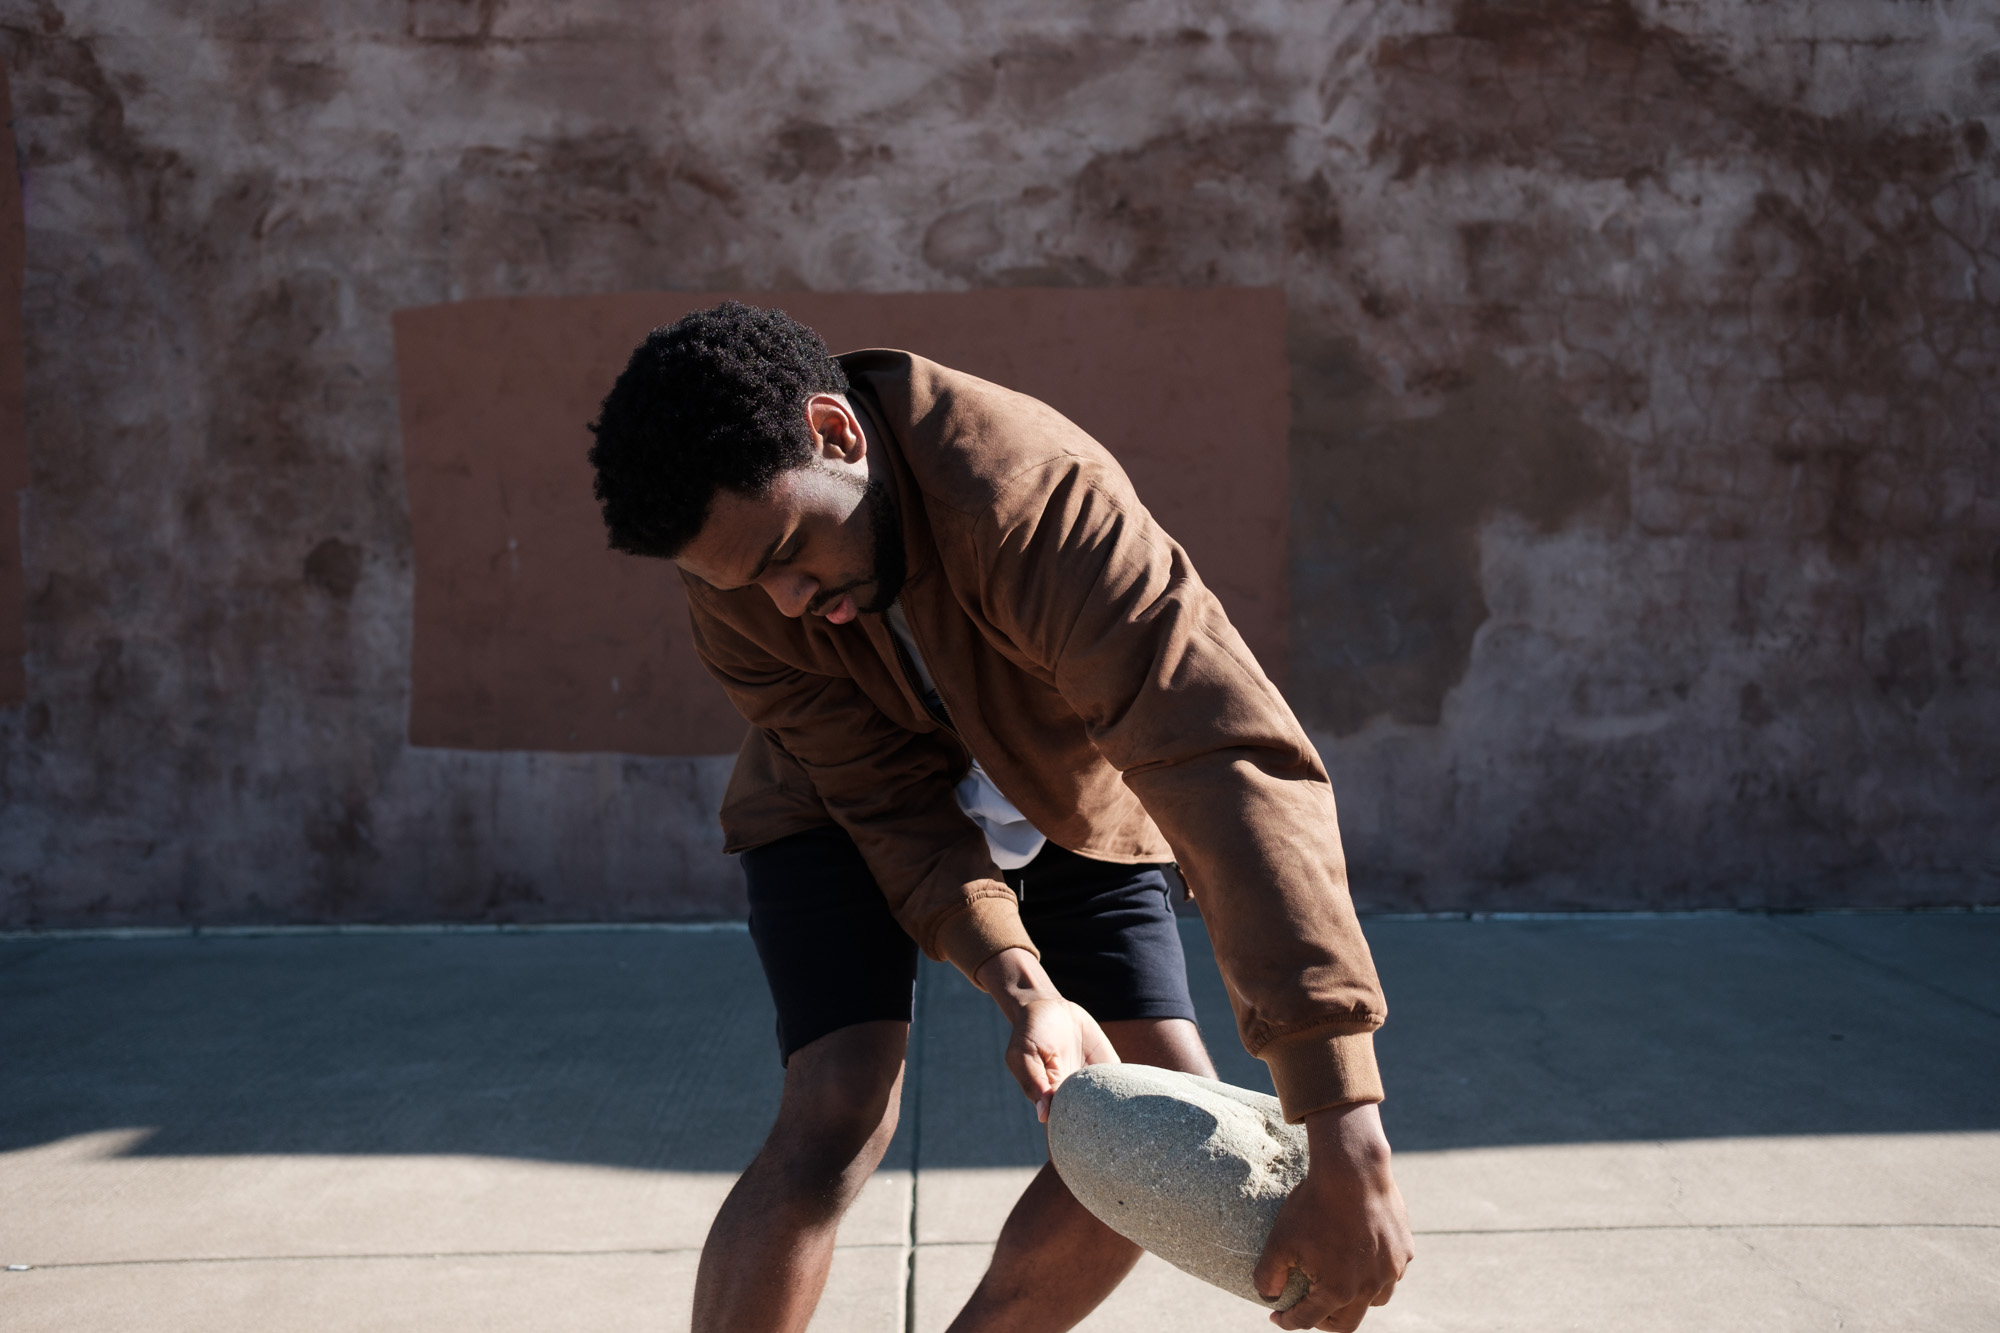 dezaun solely: on his journey through dance, teaching, and returning to architecture